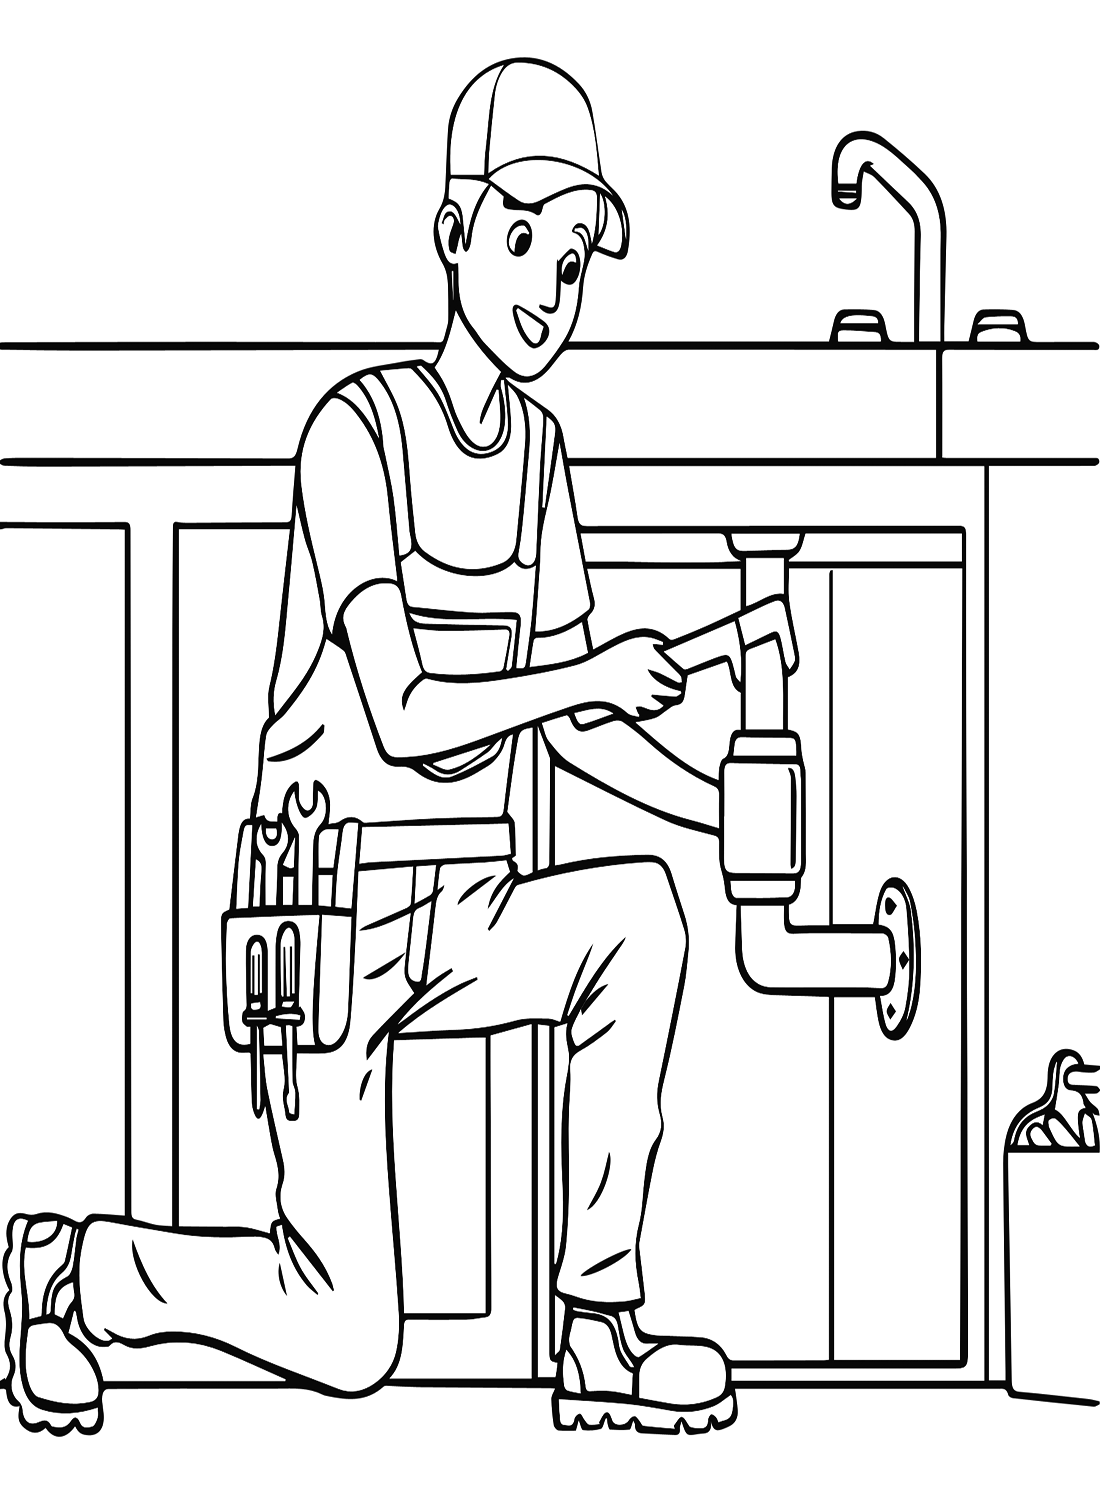 Plumber with Wrench Coloring Pages